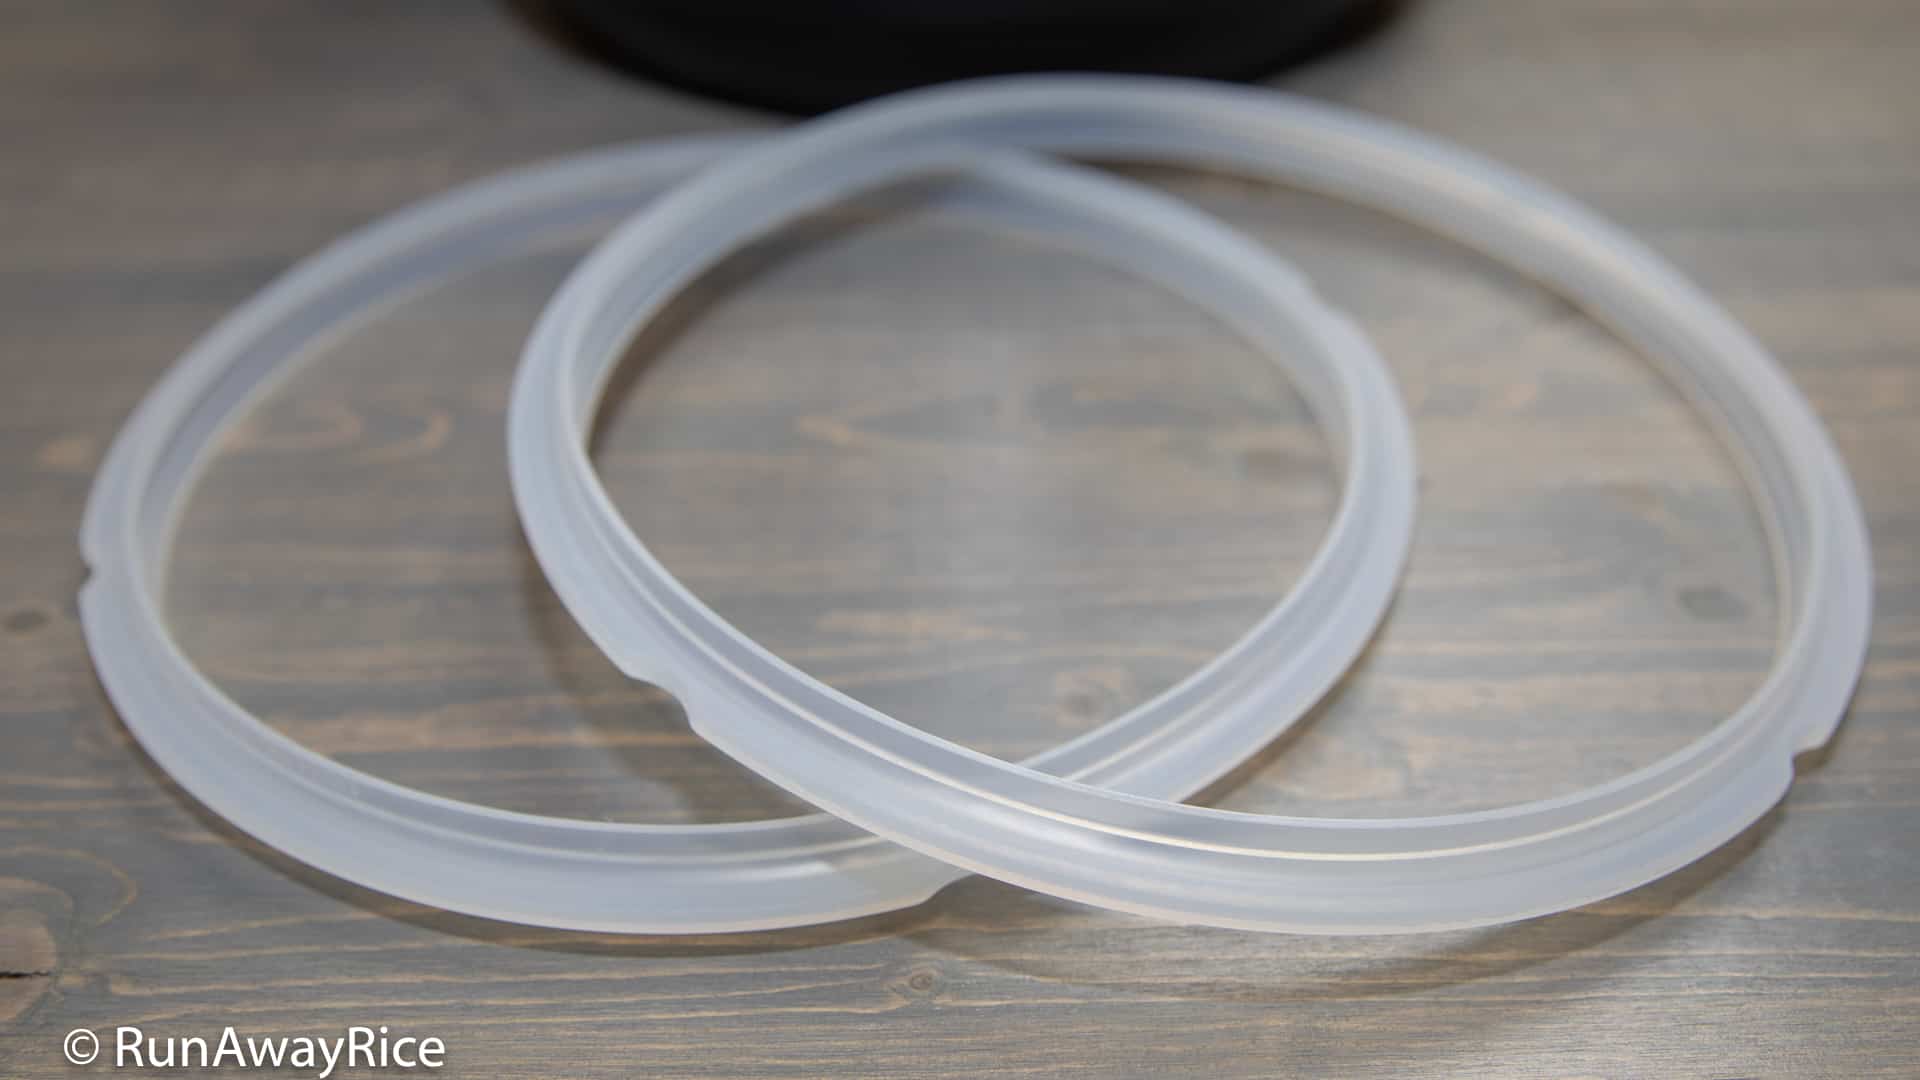 http://runawayrice.com/wp-content/uploads/2018/11/Instant-Pot-Silicone-Sealing-Rings.jpg